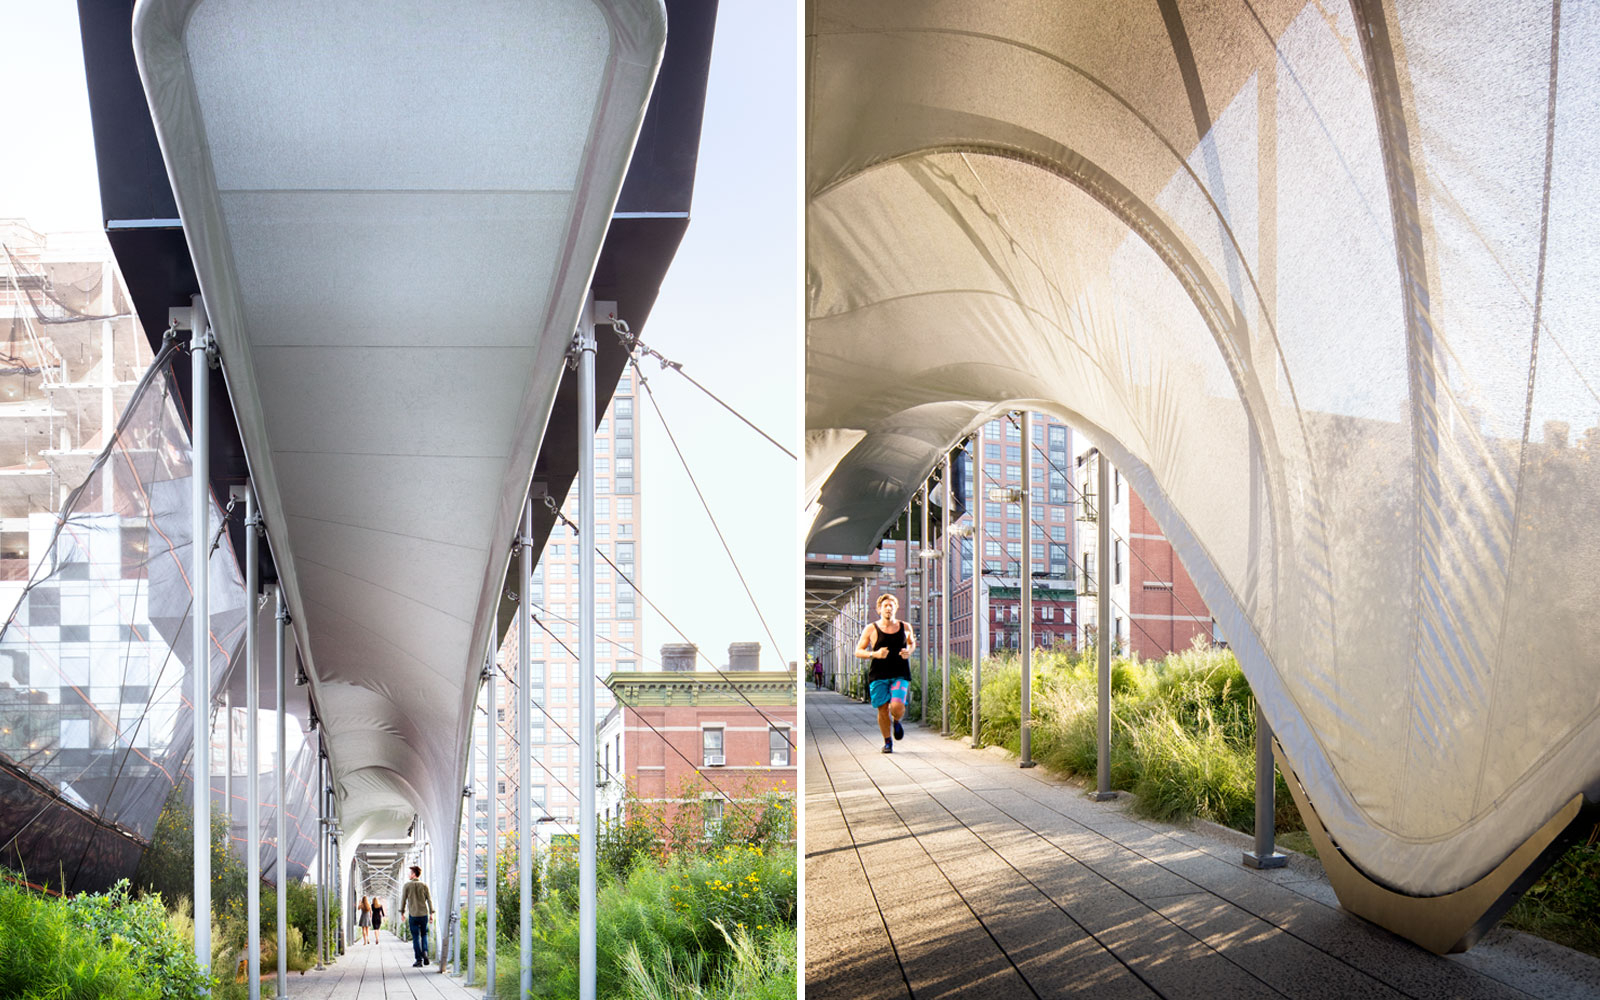 Take a Look at Zaha Hadid's Sculpture for NYC's High Line Park